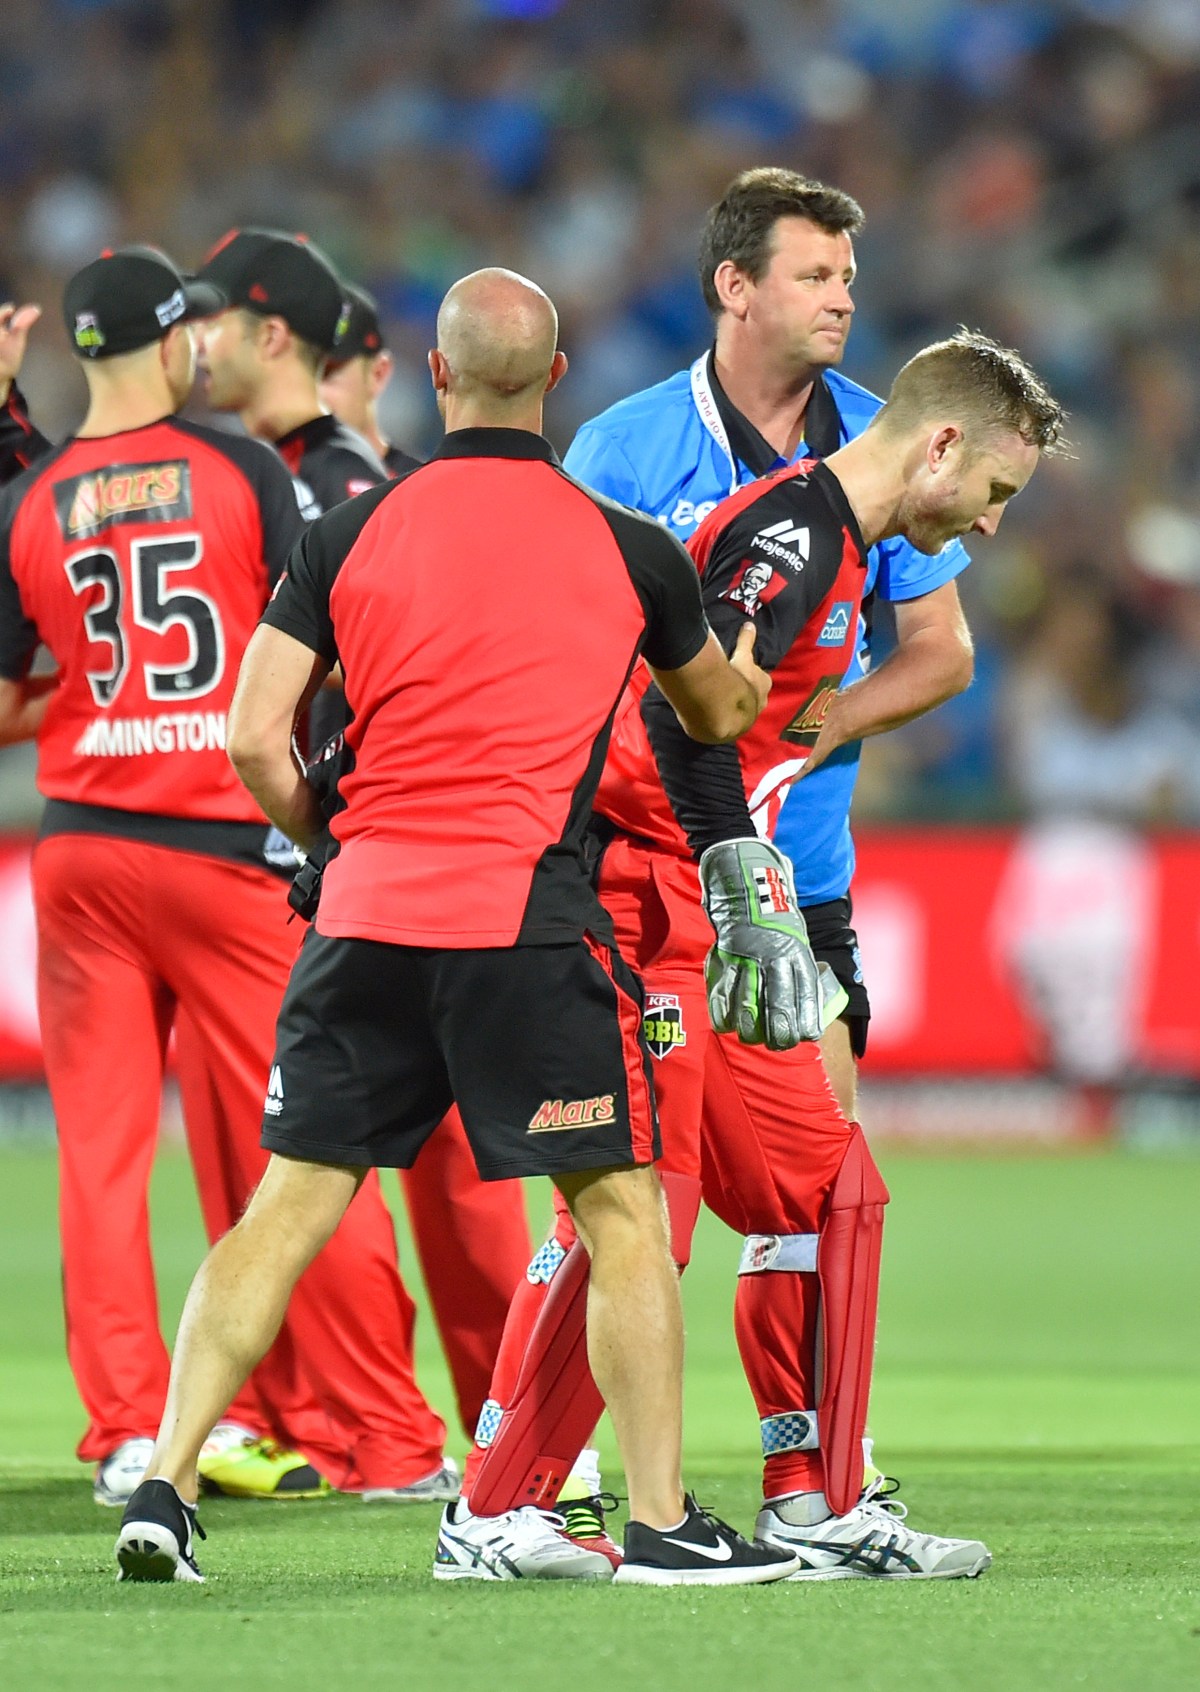 Peter Nevill of the Melbourne Renegades is helped of the field during the BBL T20 match between the Adelaide Strikers and the Melbourne Renegades at the Adelaide Oval in Adelaide, Monday, Jan. 16, 2017. (AAP Image/David Mariuz) NO ARCHIVING, EDITORIAL USE ONLY, IMAGES TO BE USED FOR NEWS REPORTING PURPOSES ONLY, NO COMMERCIAL USE WHATSOEVER, NO USE IN BOOKS WITHOUT PRIOR WRITTEN CONSENT FROM AAP